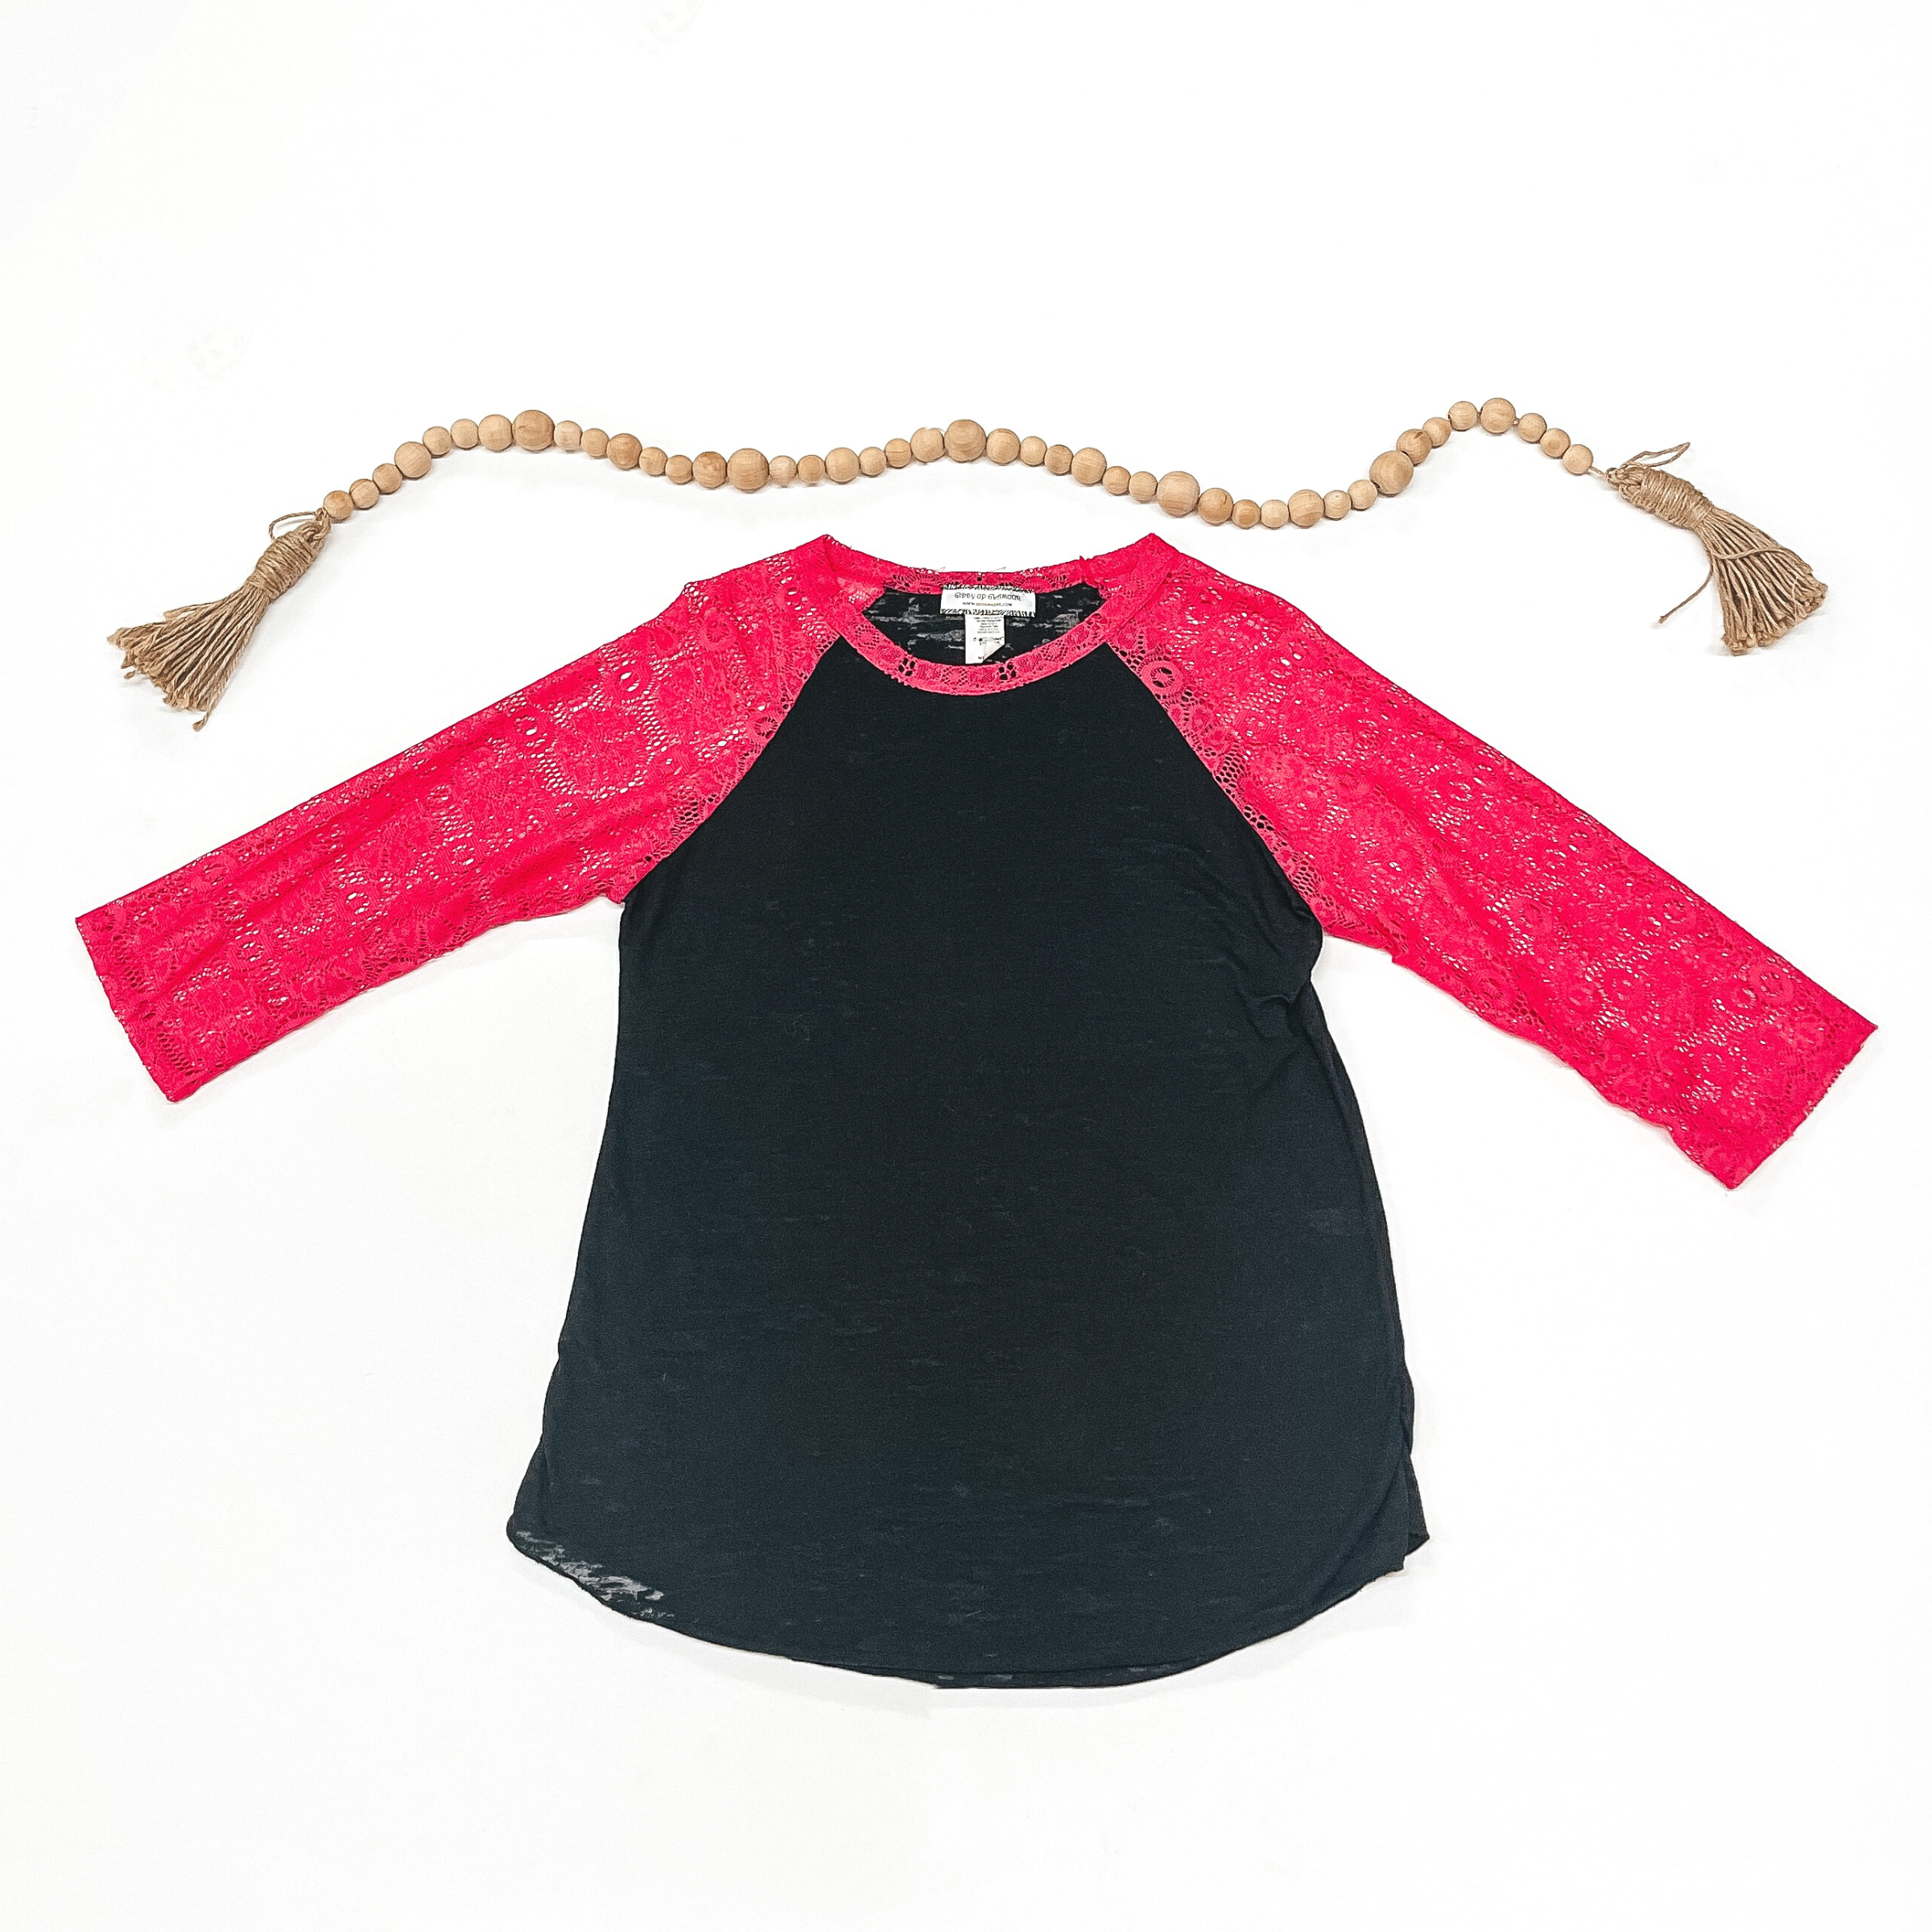 Last Chance Size Small | Crochet with Love Black Burnout Baseball Tee with Hot Pink Crotchet Sleeves | ONLY 1 LEFT! - Giddy Up Glamour Boutique